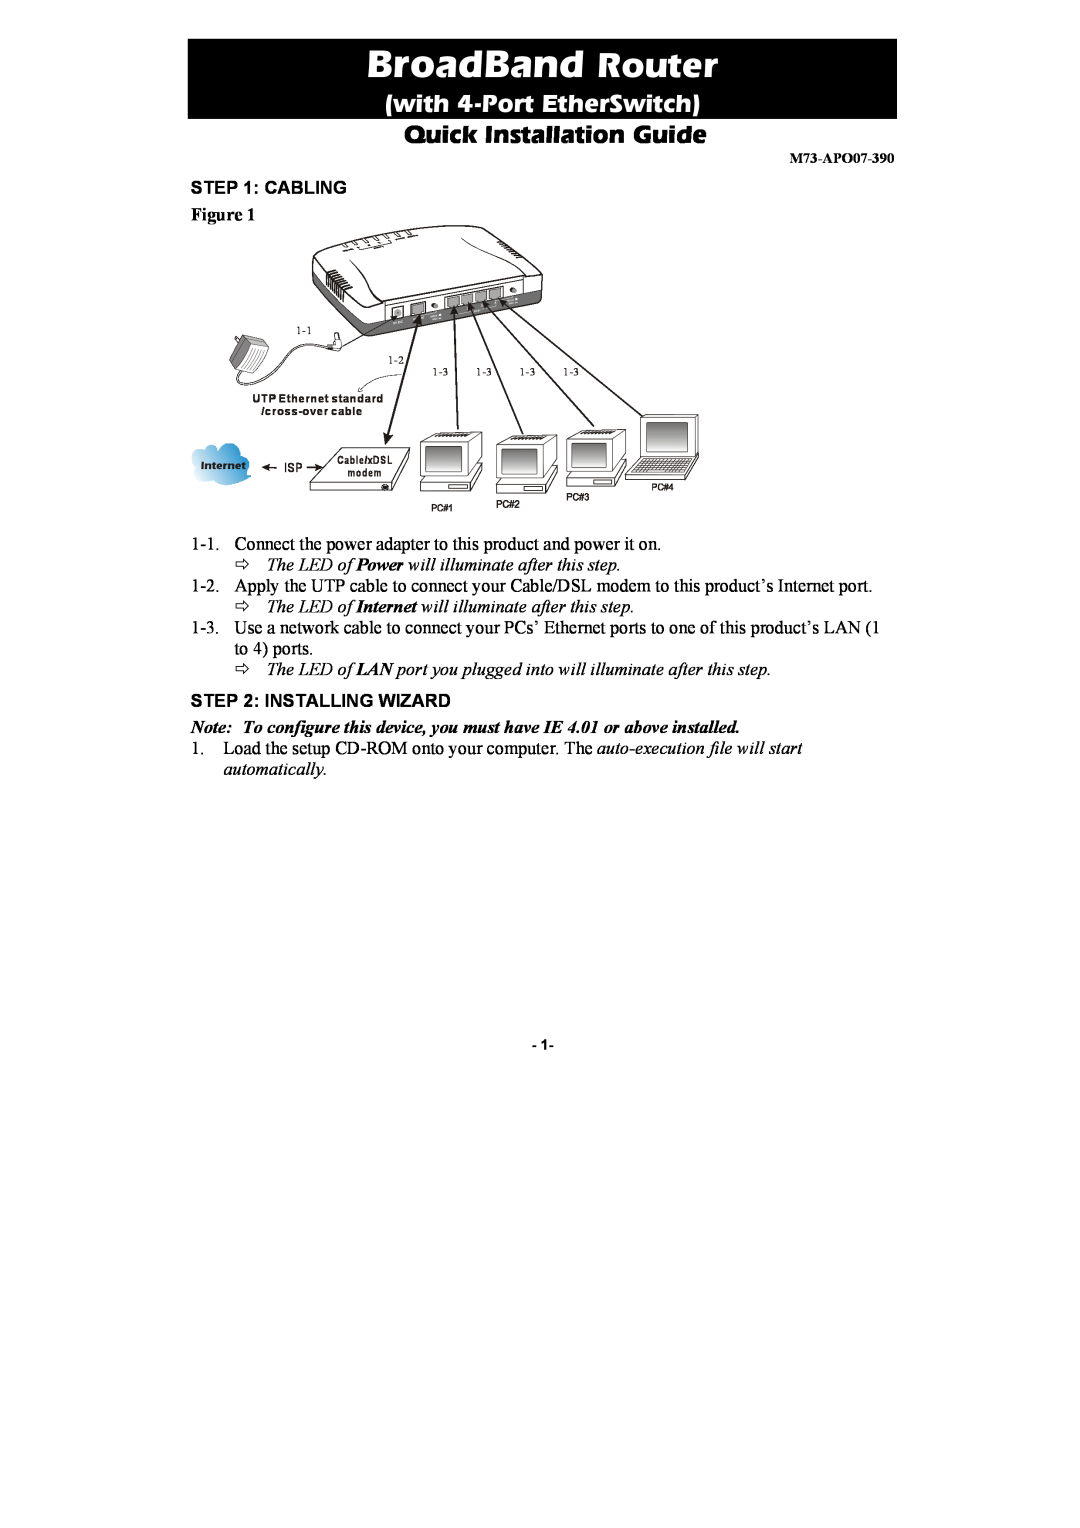 Abocom CAS2047 manual Cabling, Installing Wizard, BroadBand Router, with 4-Port EtherSwitch, Quick Installation Guide 